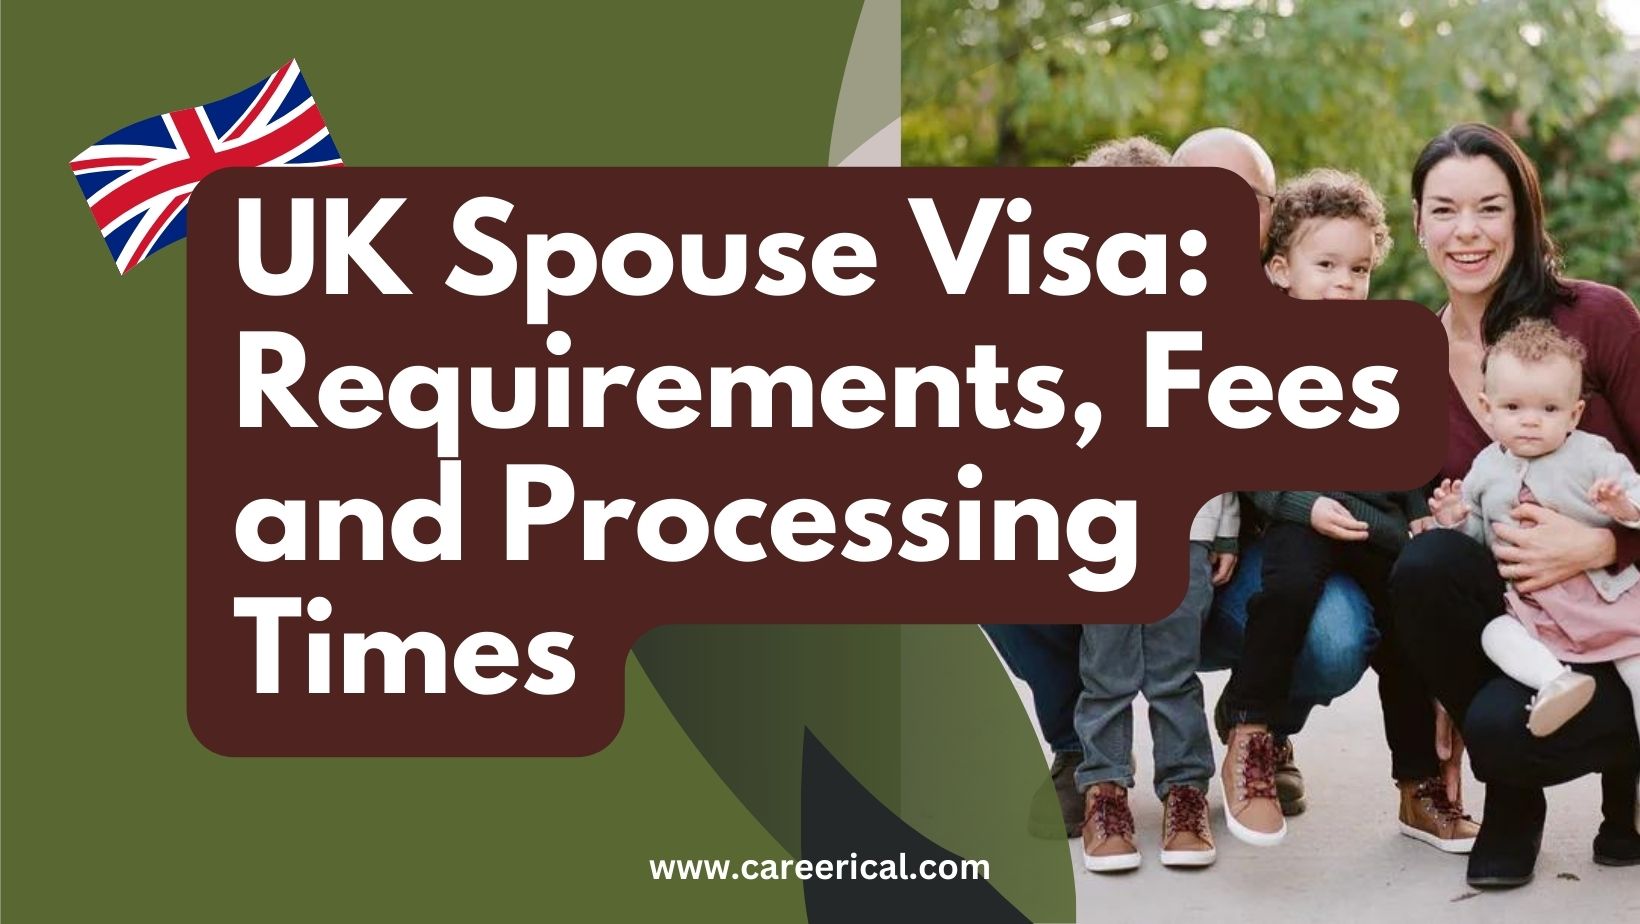 UK Spouse Visa Requirements, Fees and Processing Times